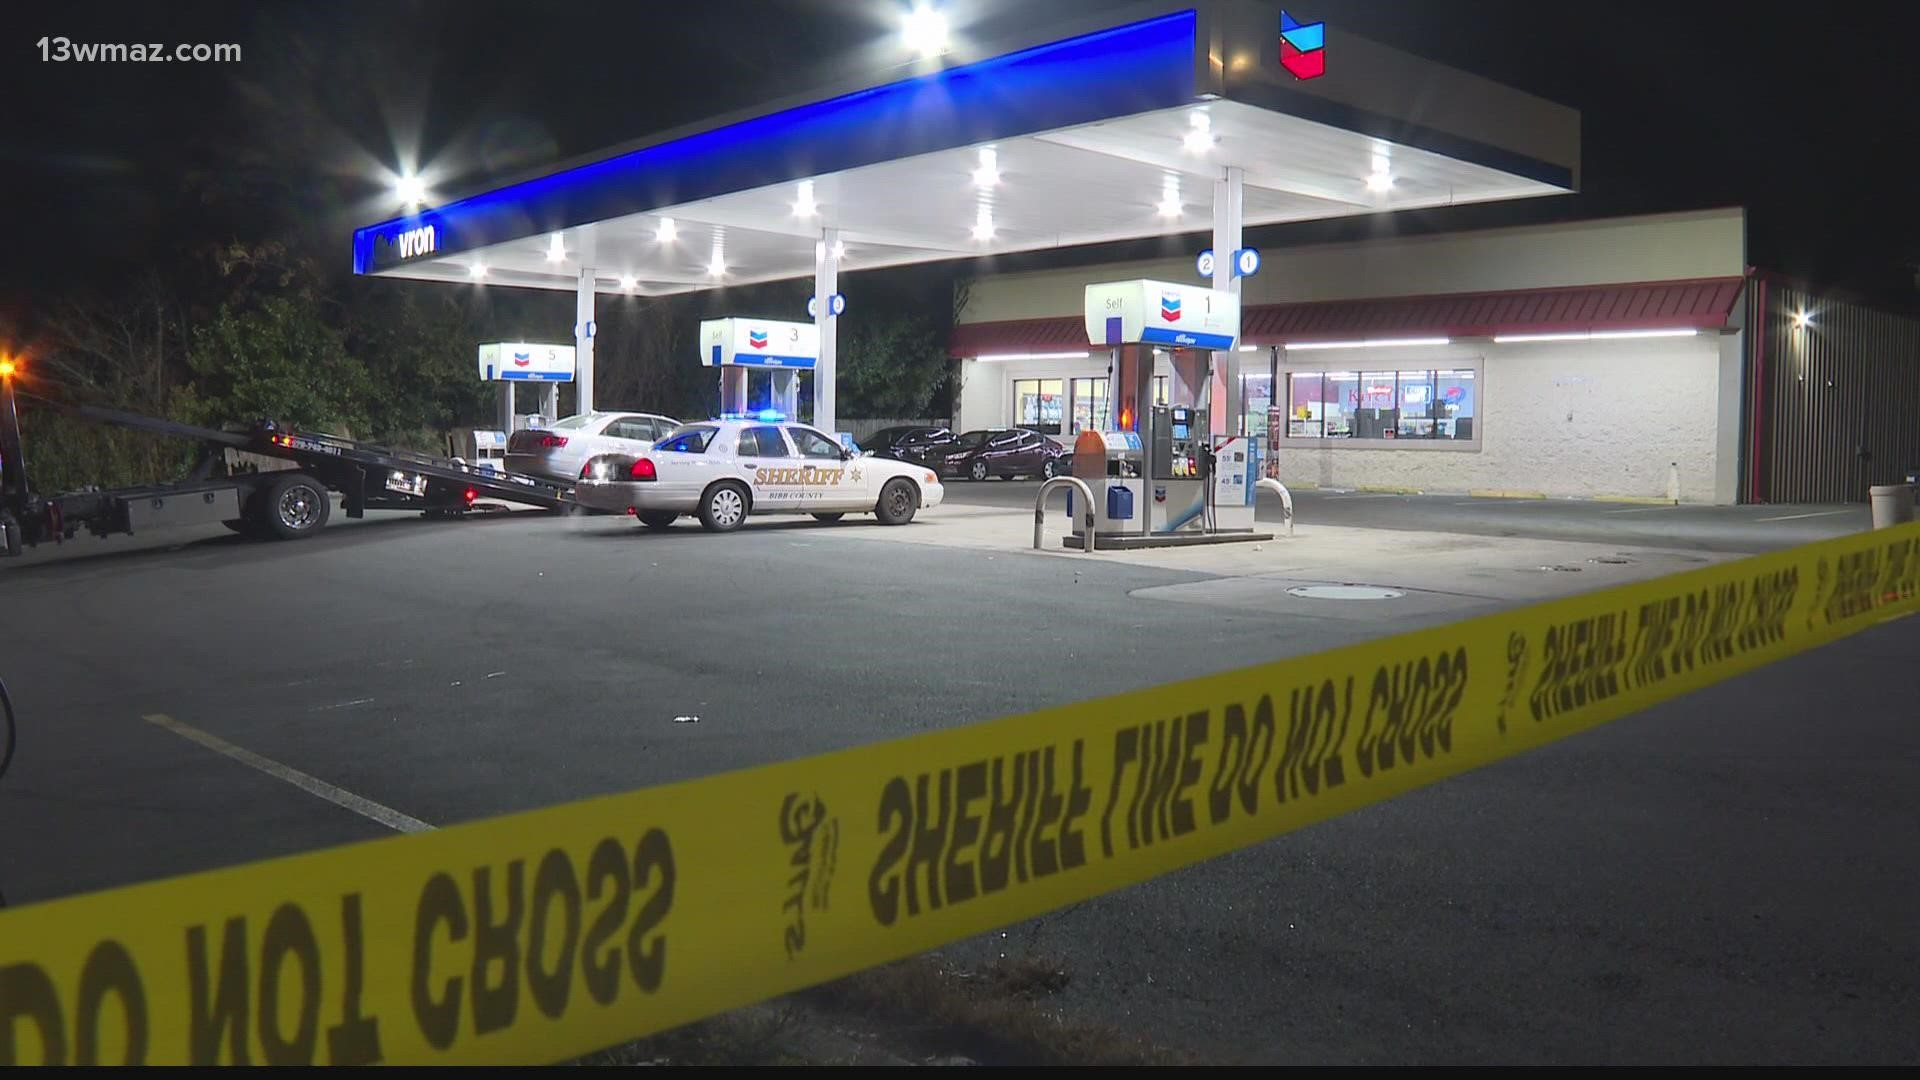 In the past year, 4 people have been shot at the same gas station, and 3 of them have died.